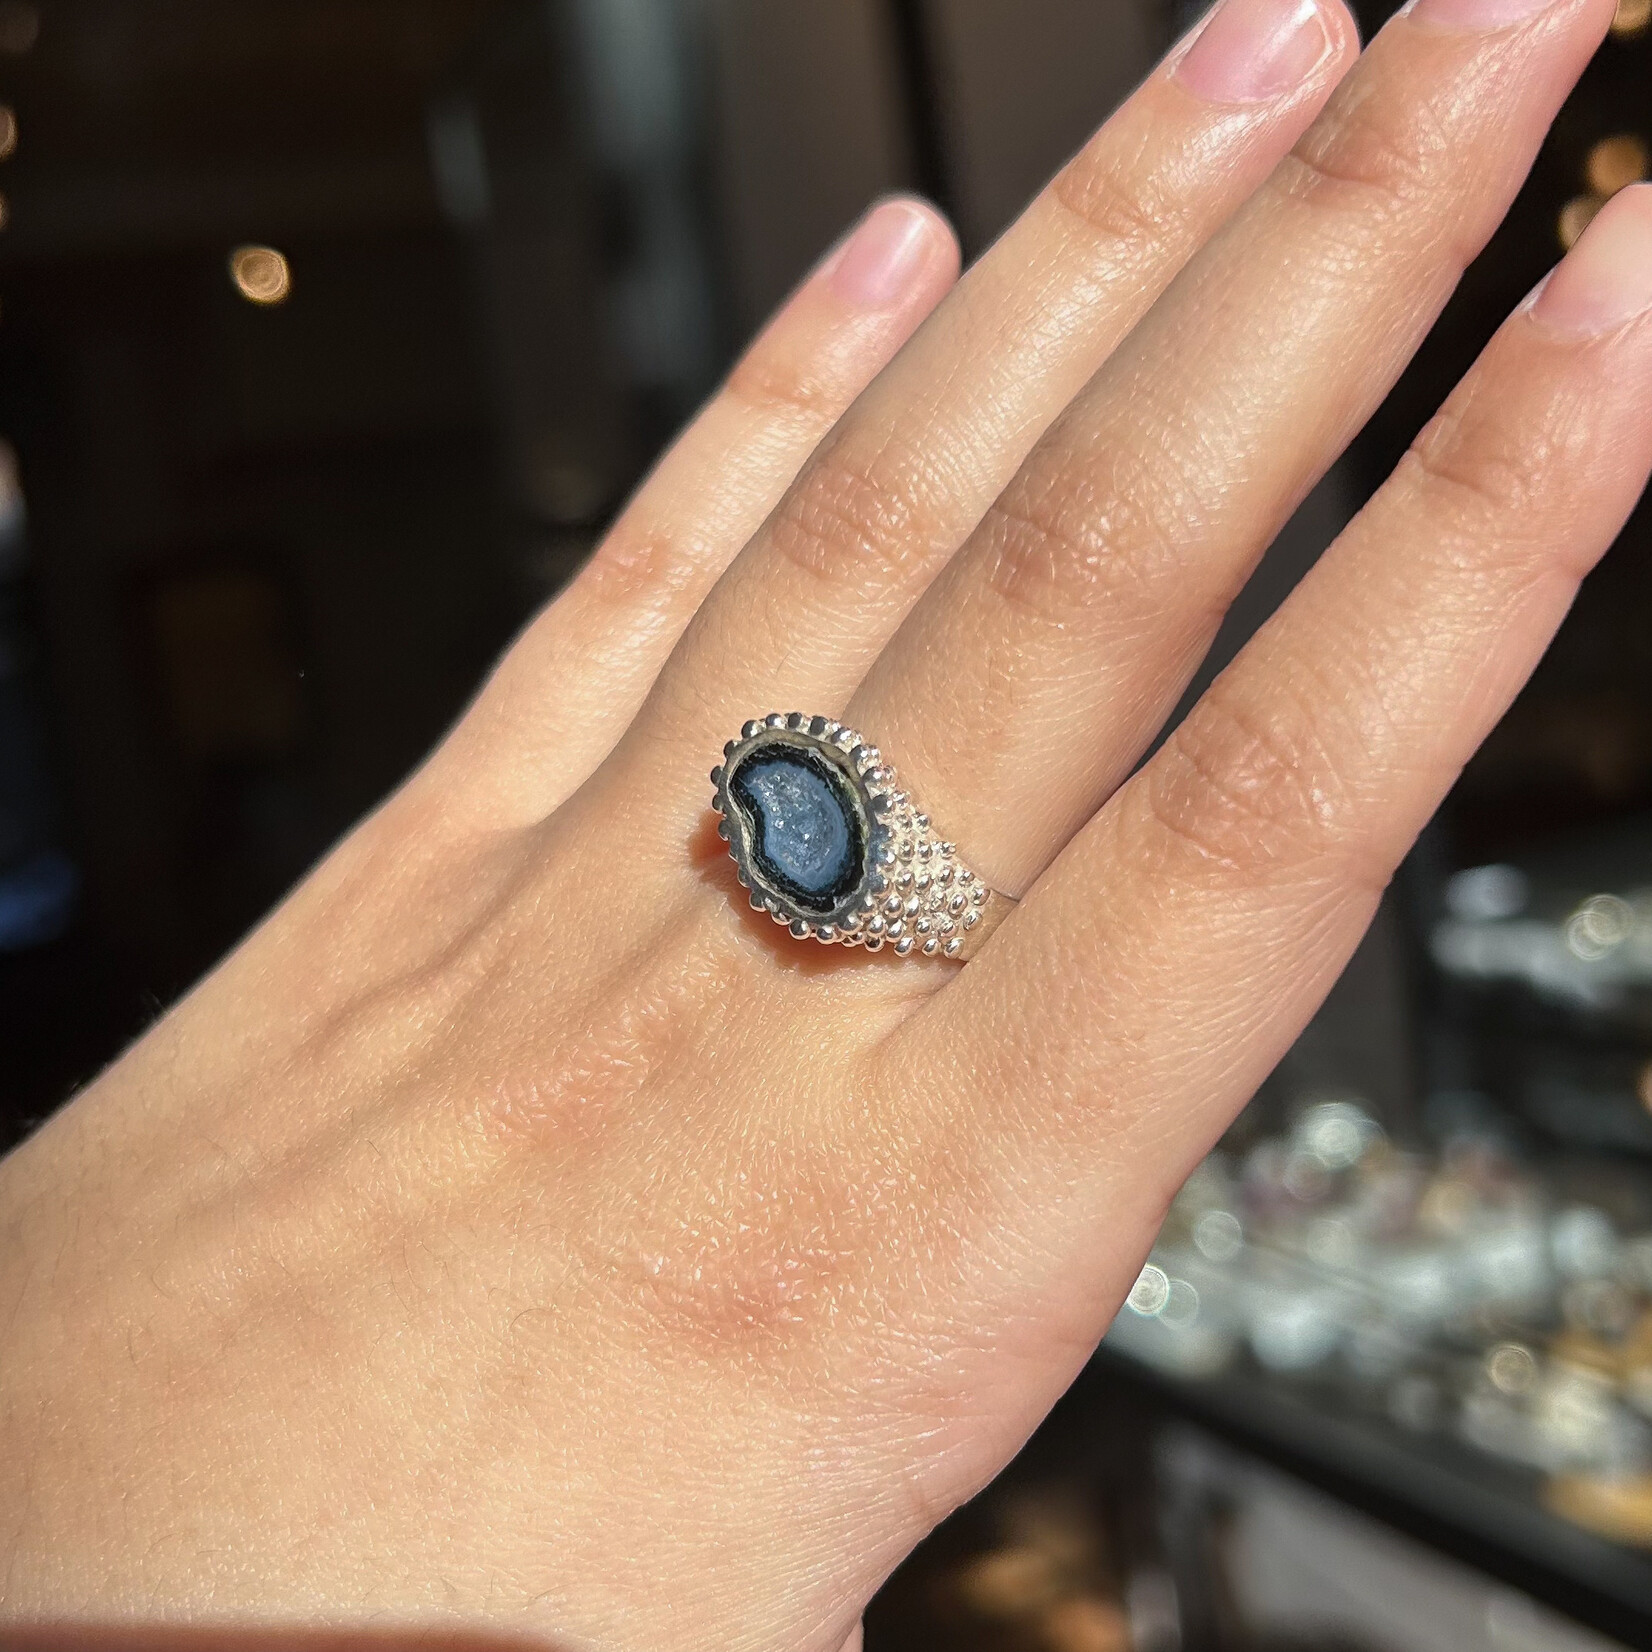 Argent tonic Textured Druzy Ring